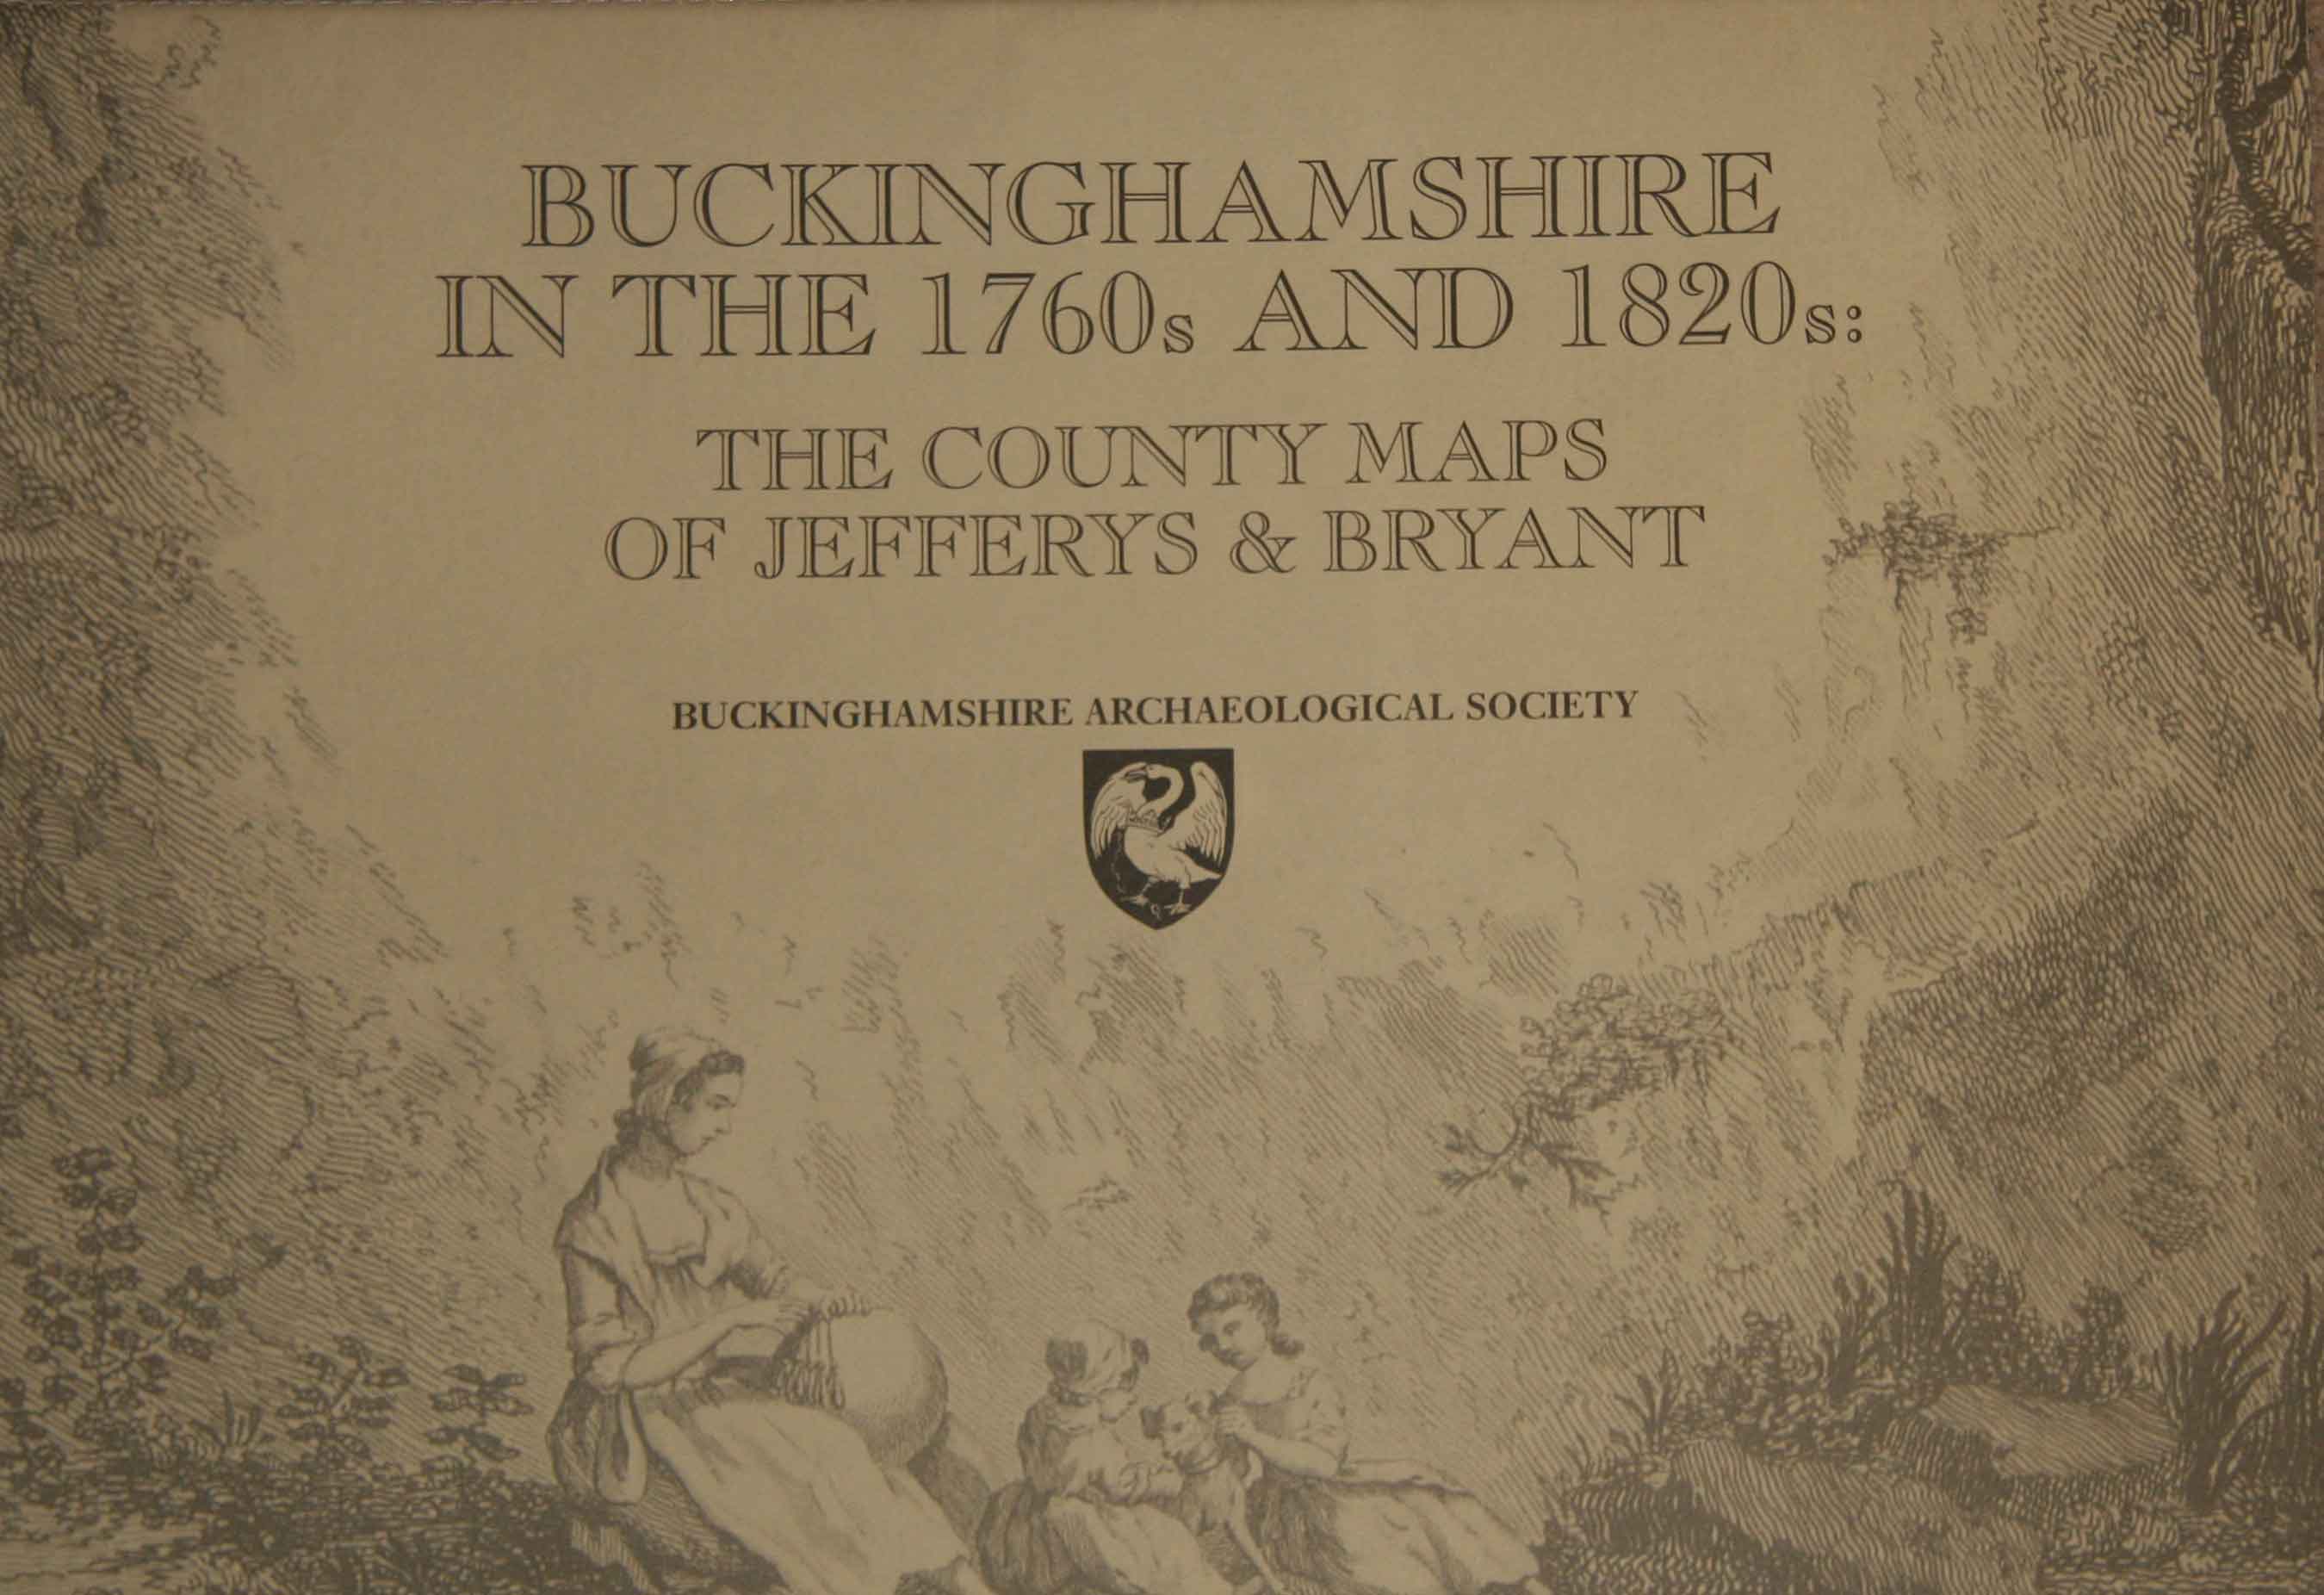 Jeffreys and Bryant maps cover